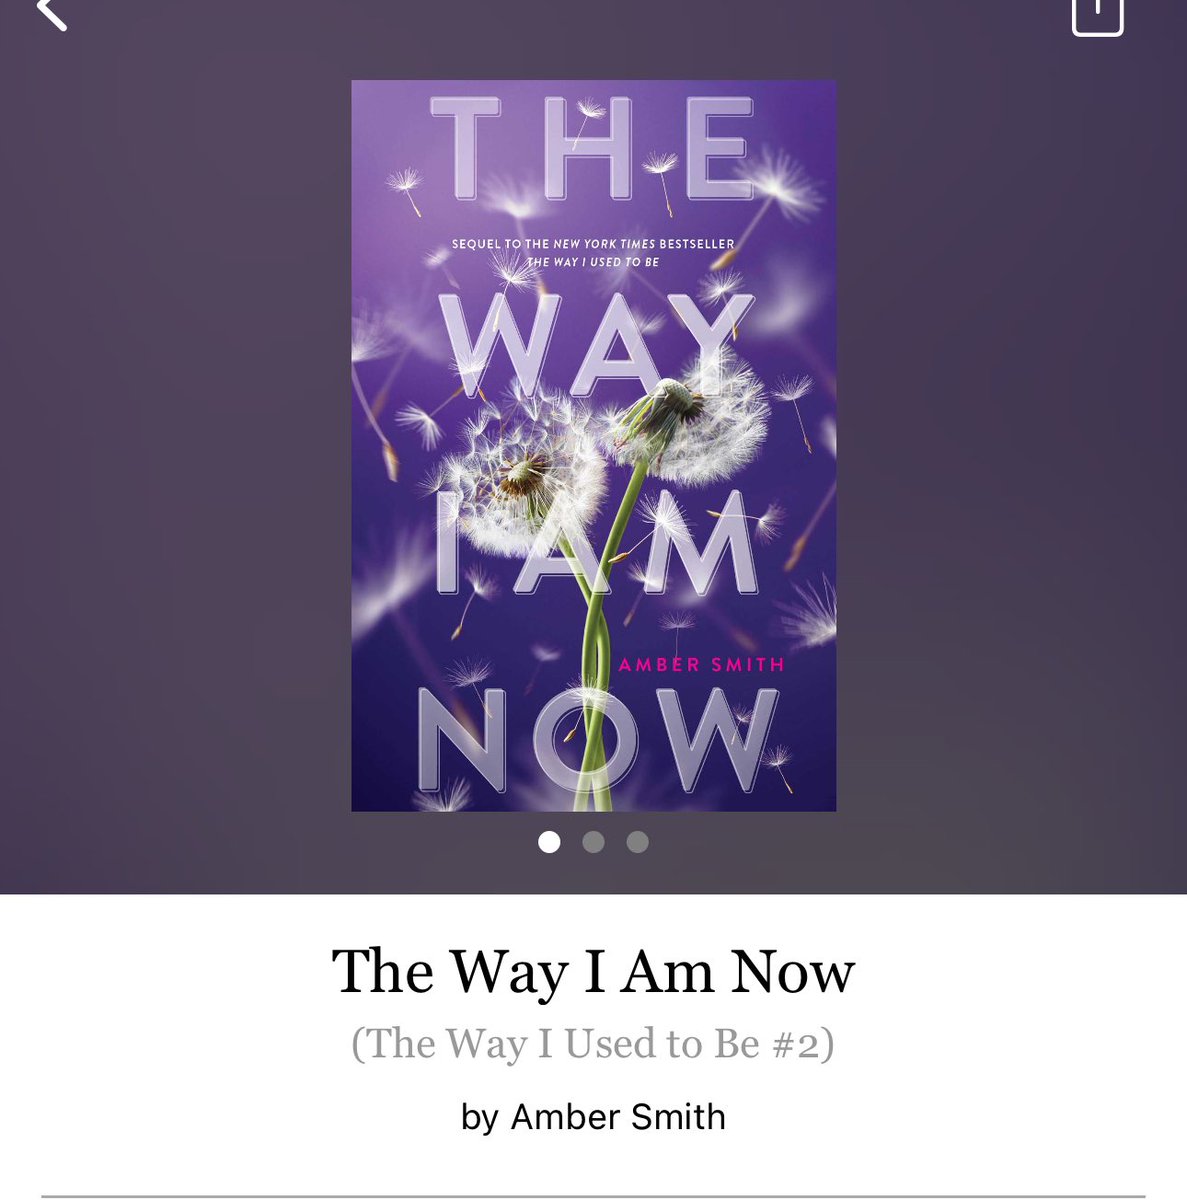 The Way I Am Now by Amber Smith 

#TheWayIAmNow by #AmberSmith #6007 #432pages #156of400 #Series #book2of2 #Audiobook #31for8 #11houraudiobook #EdenAndJosh #heWayIAmNowSeries #february2024 #clearingoffreadingshelves #whatsnext #readitquick